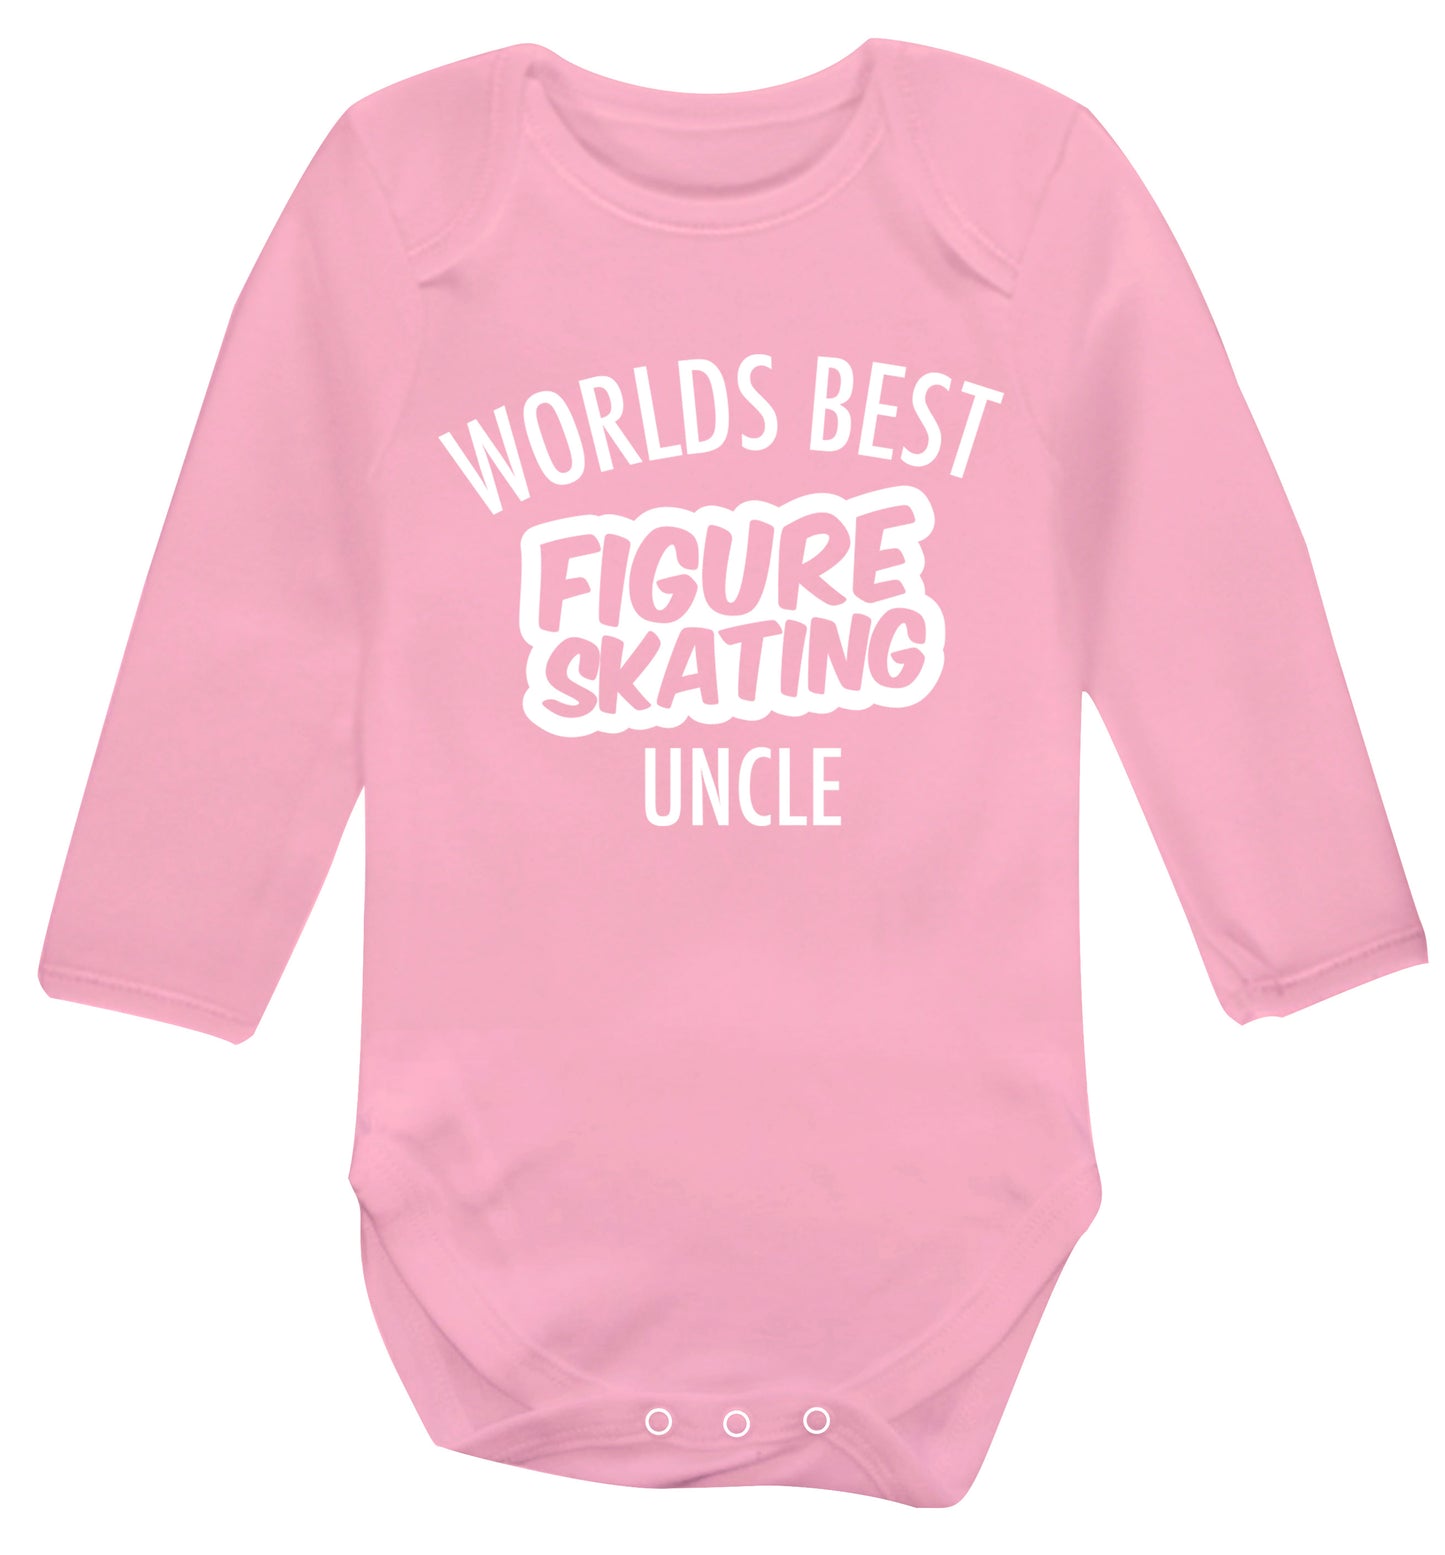 Worlds best figure skating uncle Baby Vest long sleeved pale pink 6-12 months